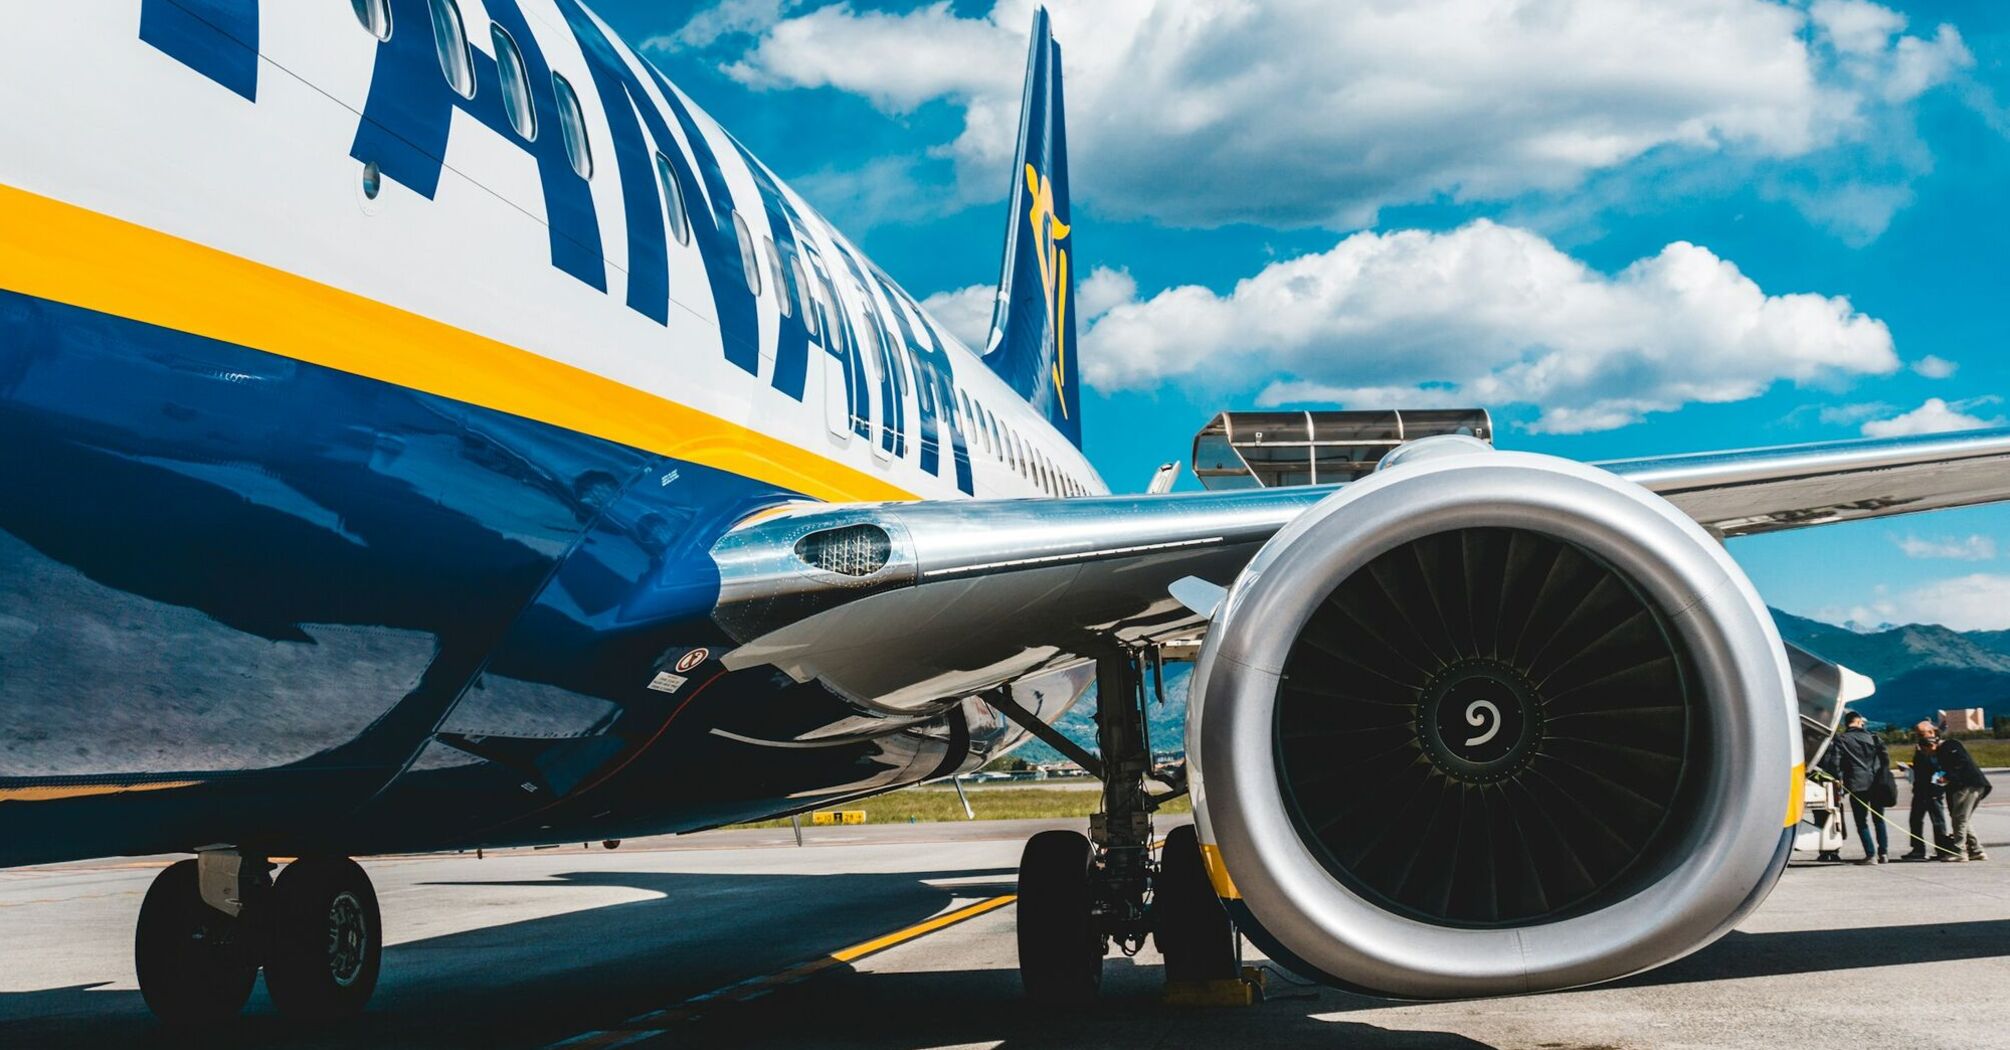 Close-up of Ryanair airplane on the runway